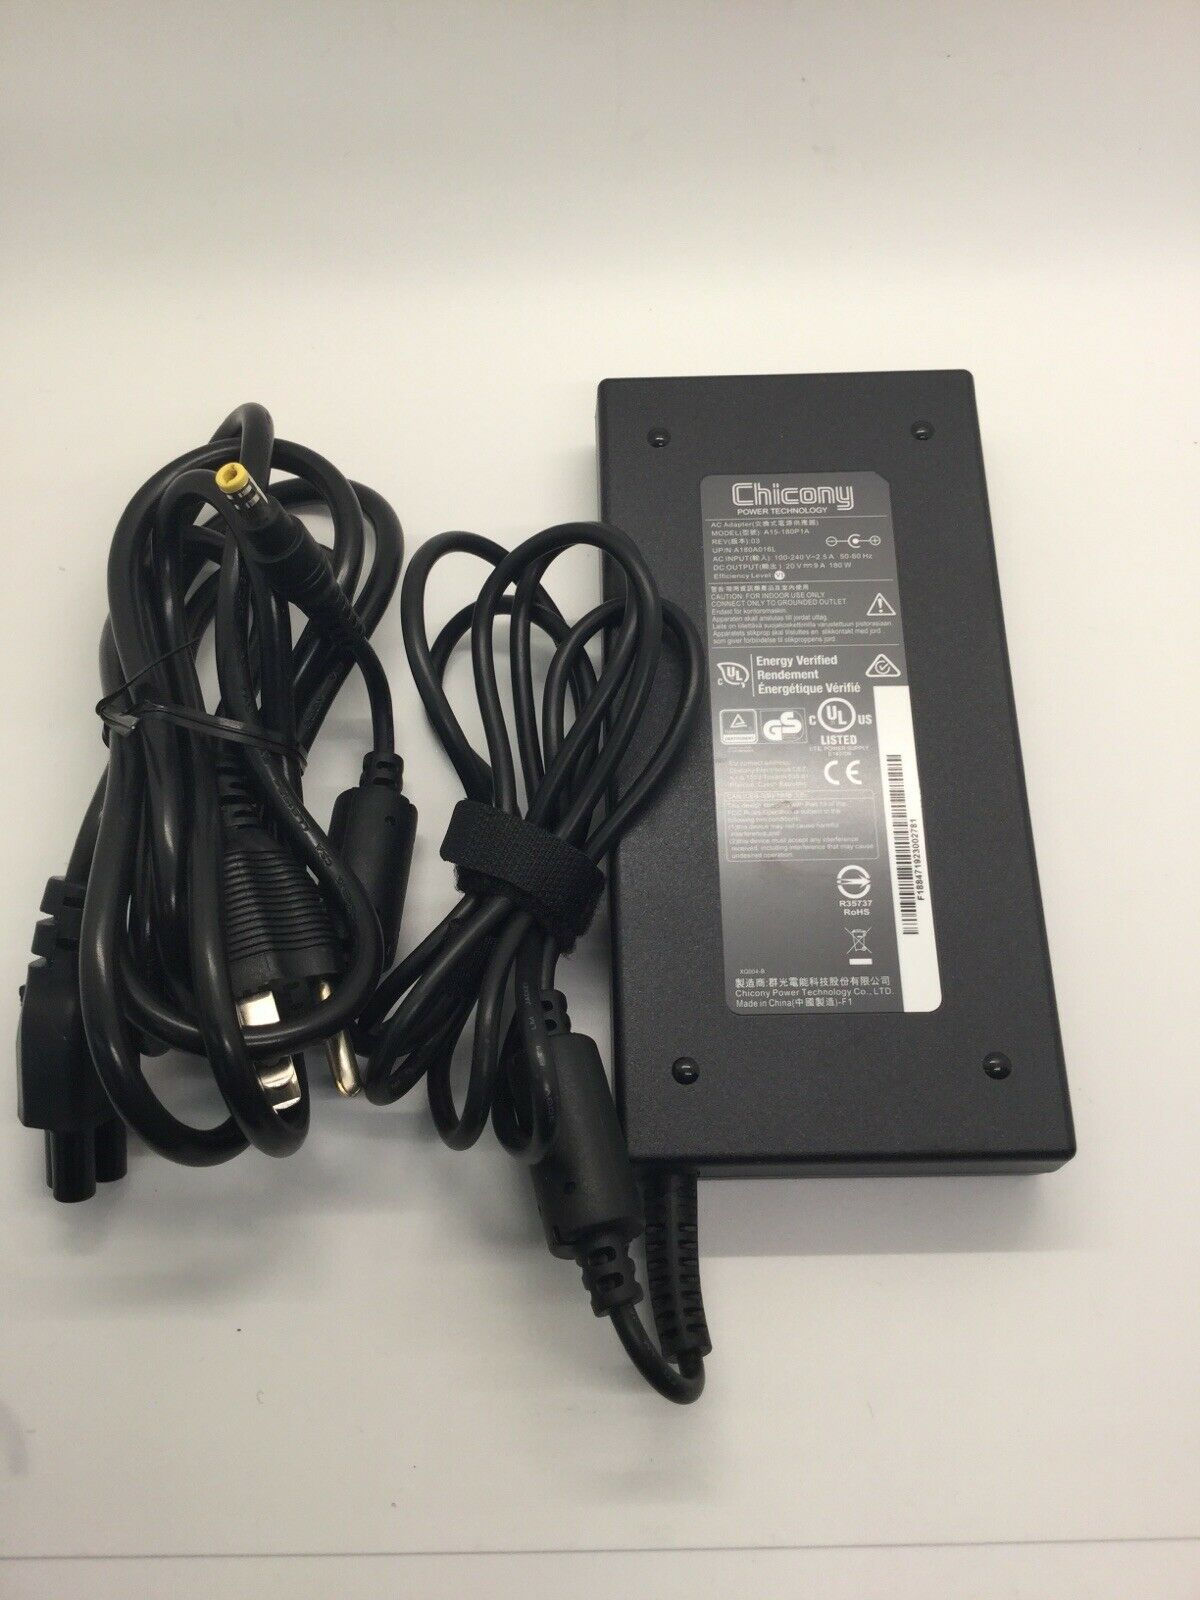 NEW A15-180P1A Genuine Chicony 180W 20V 9A AC Adapter Power Supply for MSI Laptop Compatible Brand: For MSI MPN: A15-18